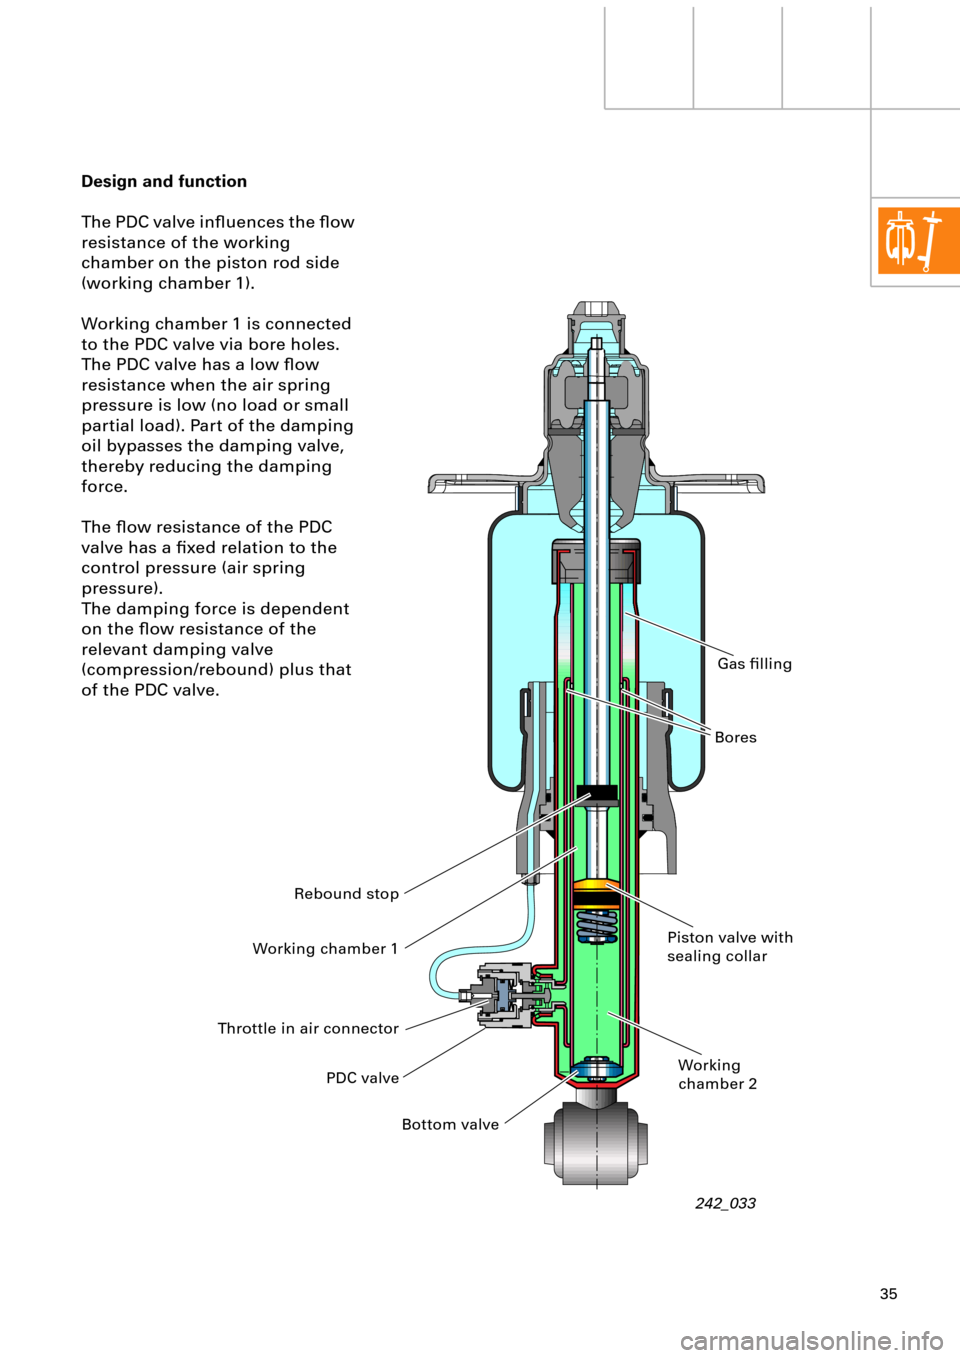 AUDI A6 ALLROAD 1999 C5 / 2.G Pneumatic Suspension System 35
Design and function
The PDC valve inßuences the ßow 
resistance of the working 
chamber on the piston rod side 
(working chamber 1).
Working chamber 1 is connected 
to the PDC valve via bore hole